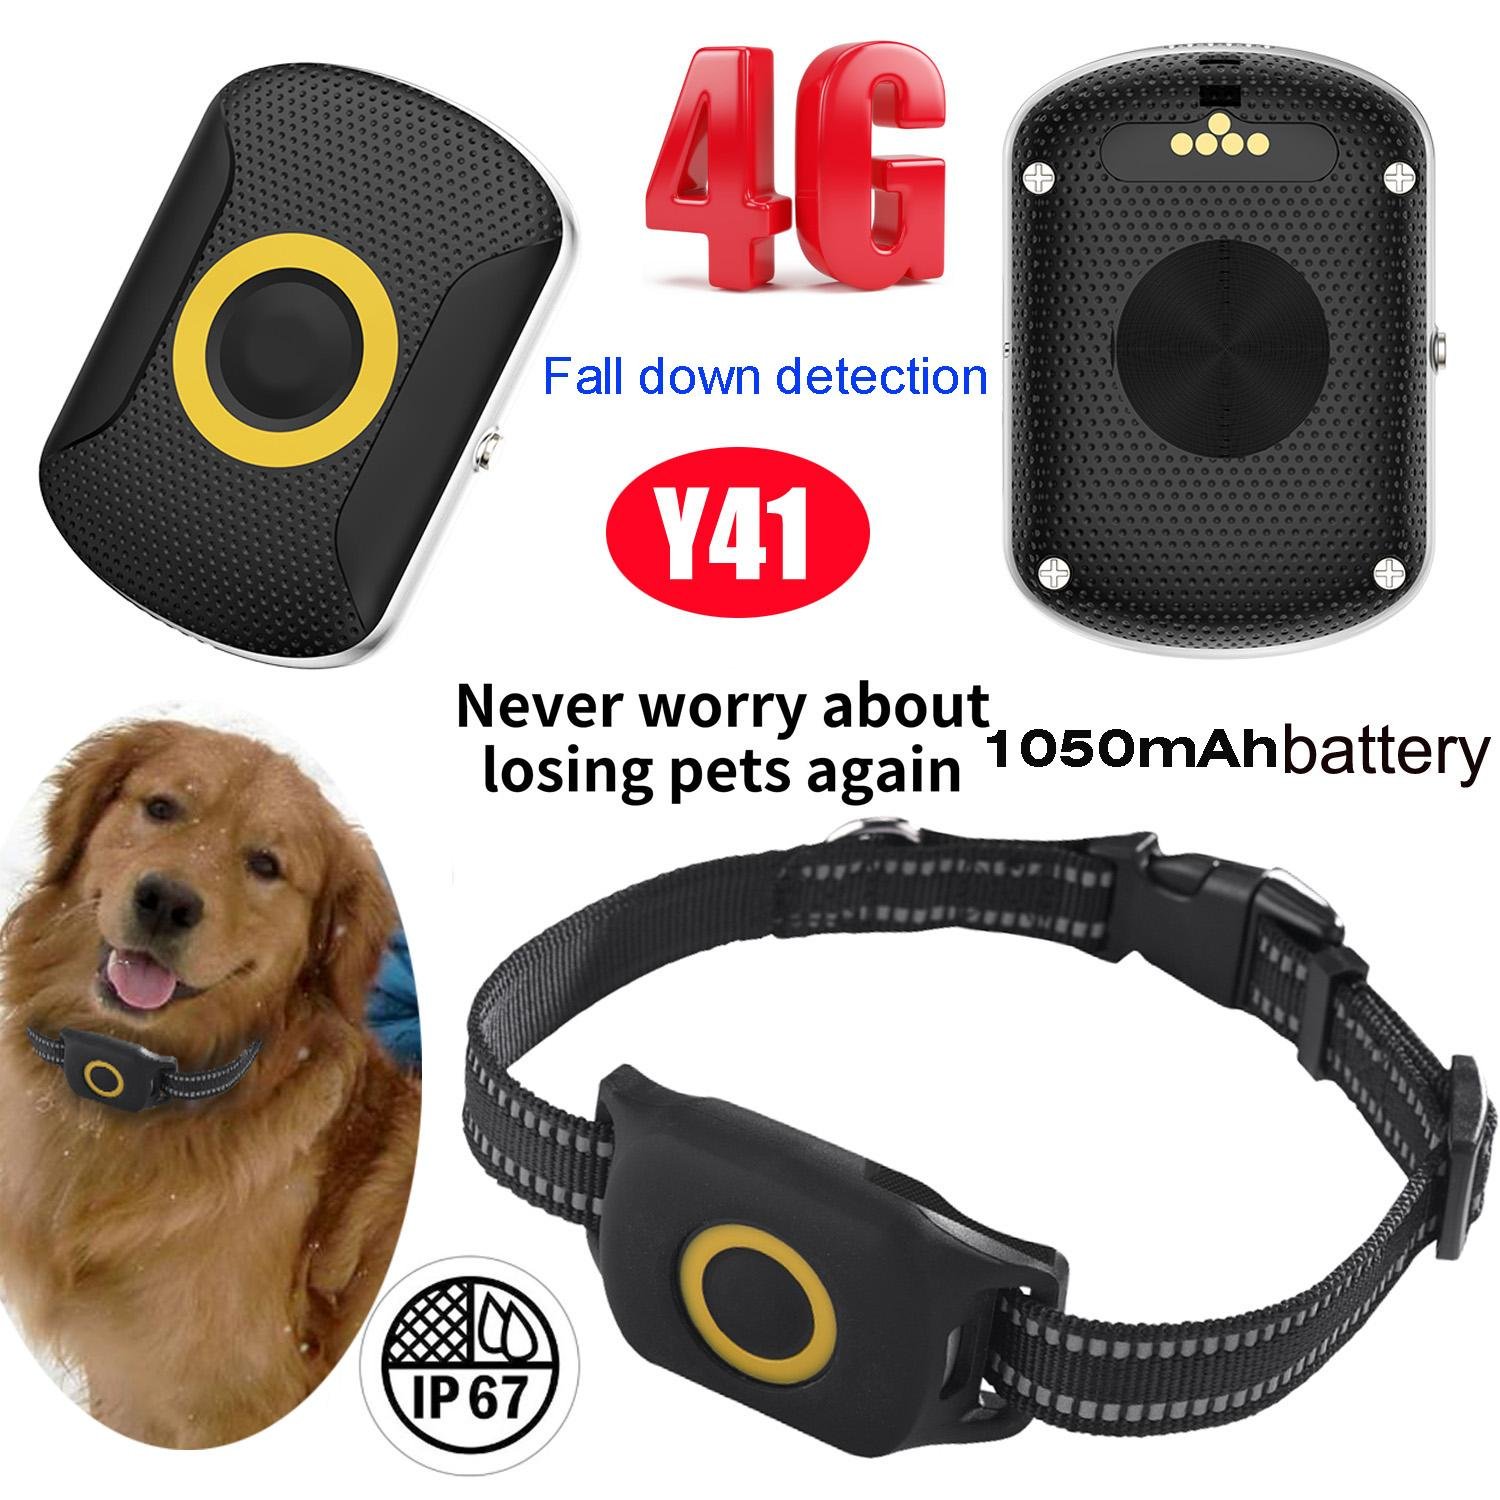 4G Pet Portable GPS Tracking Device with Waterproof